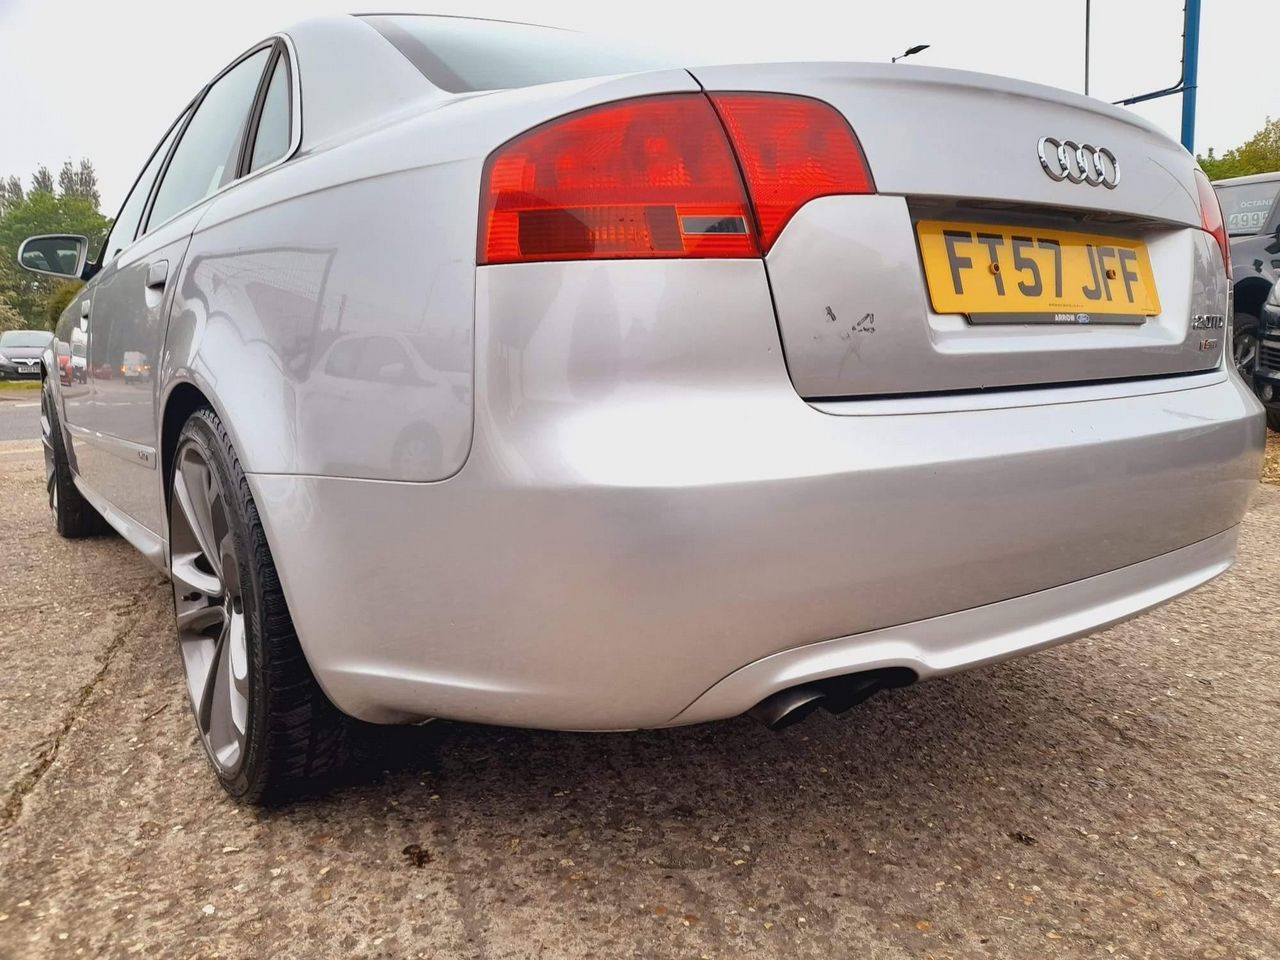 2008 Audi A4 2.0 TDI S line CVT 4dr - Picture 12 of 50